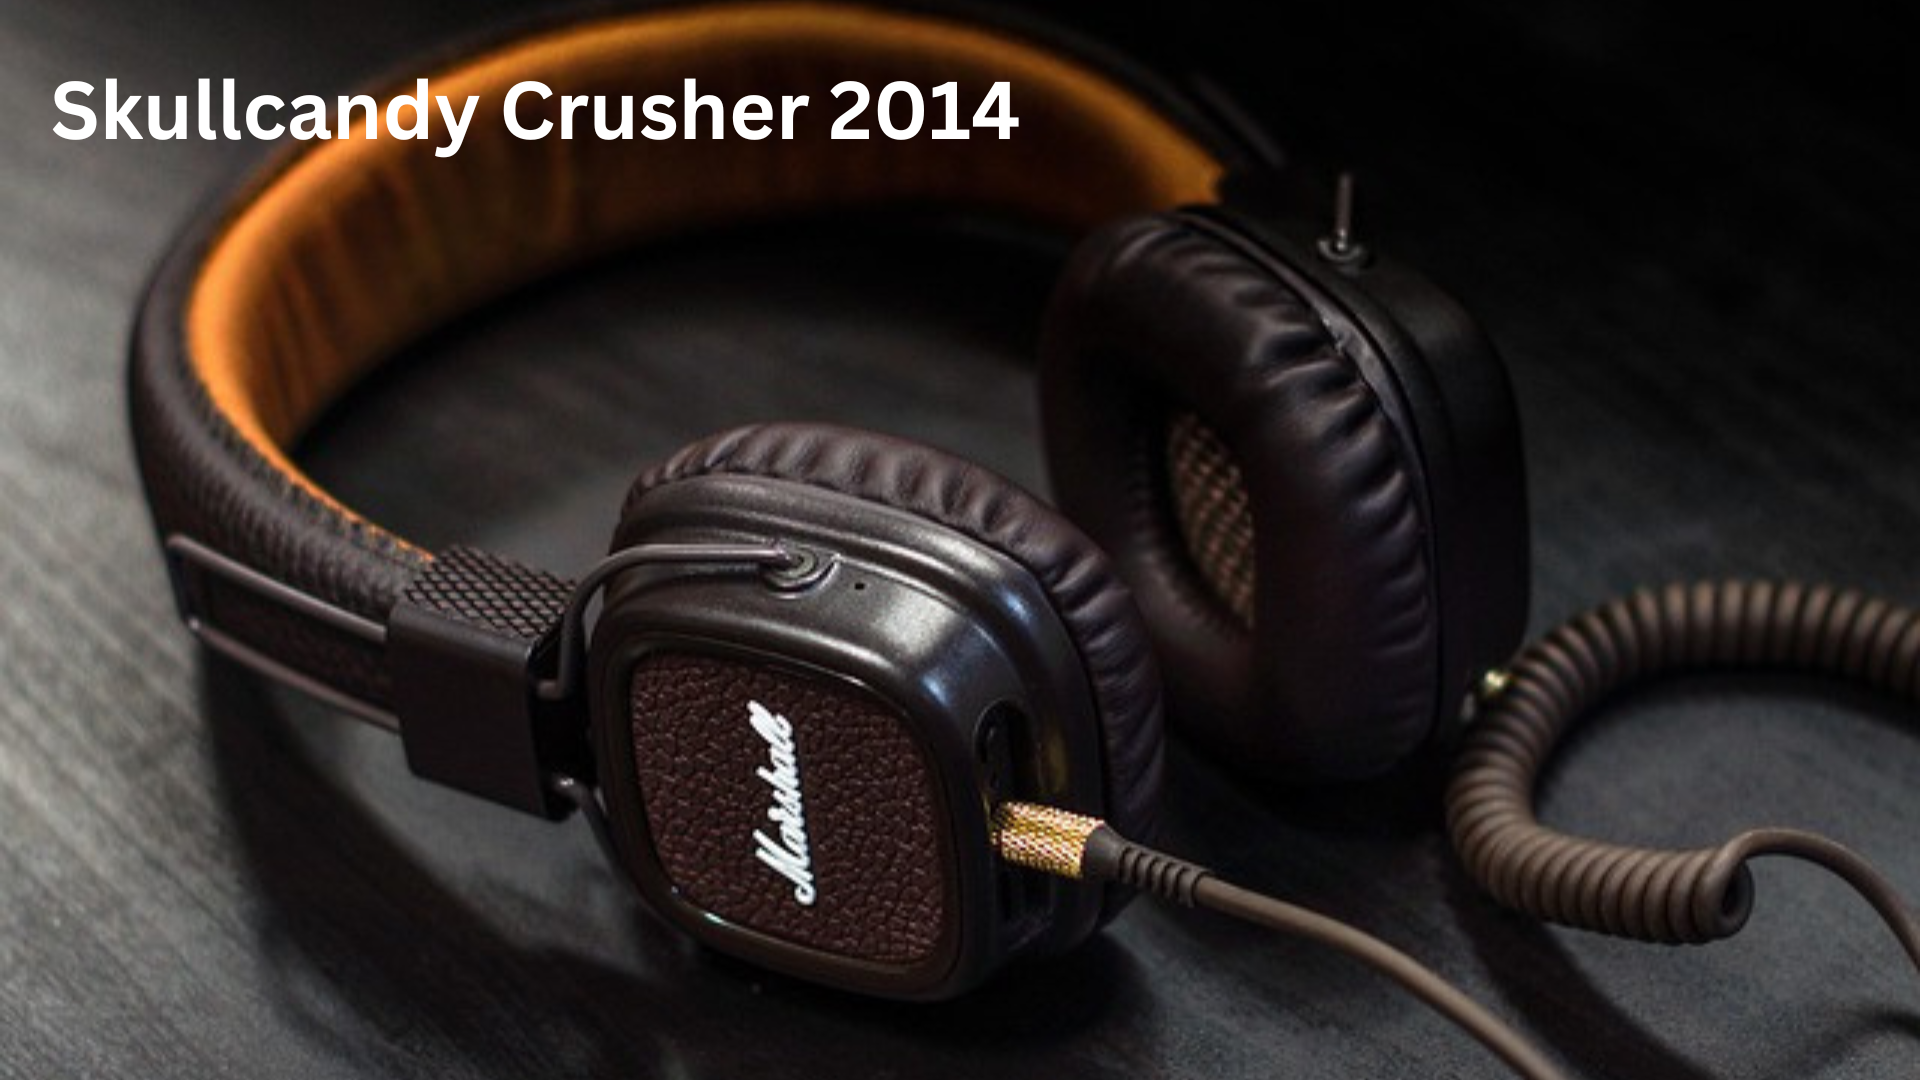 Skullcandy Crusher 2014: Review of Specs, Price & Features